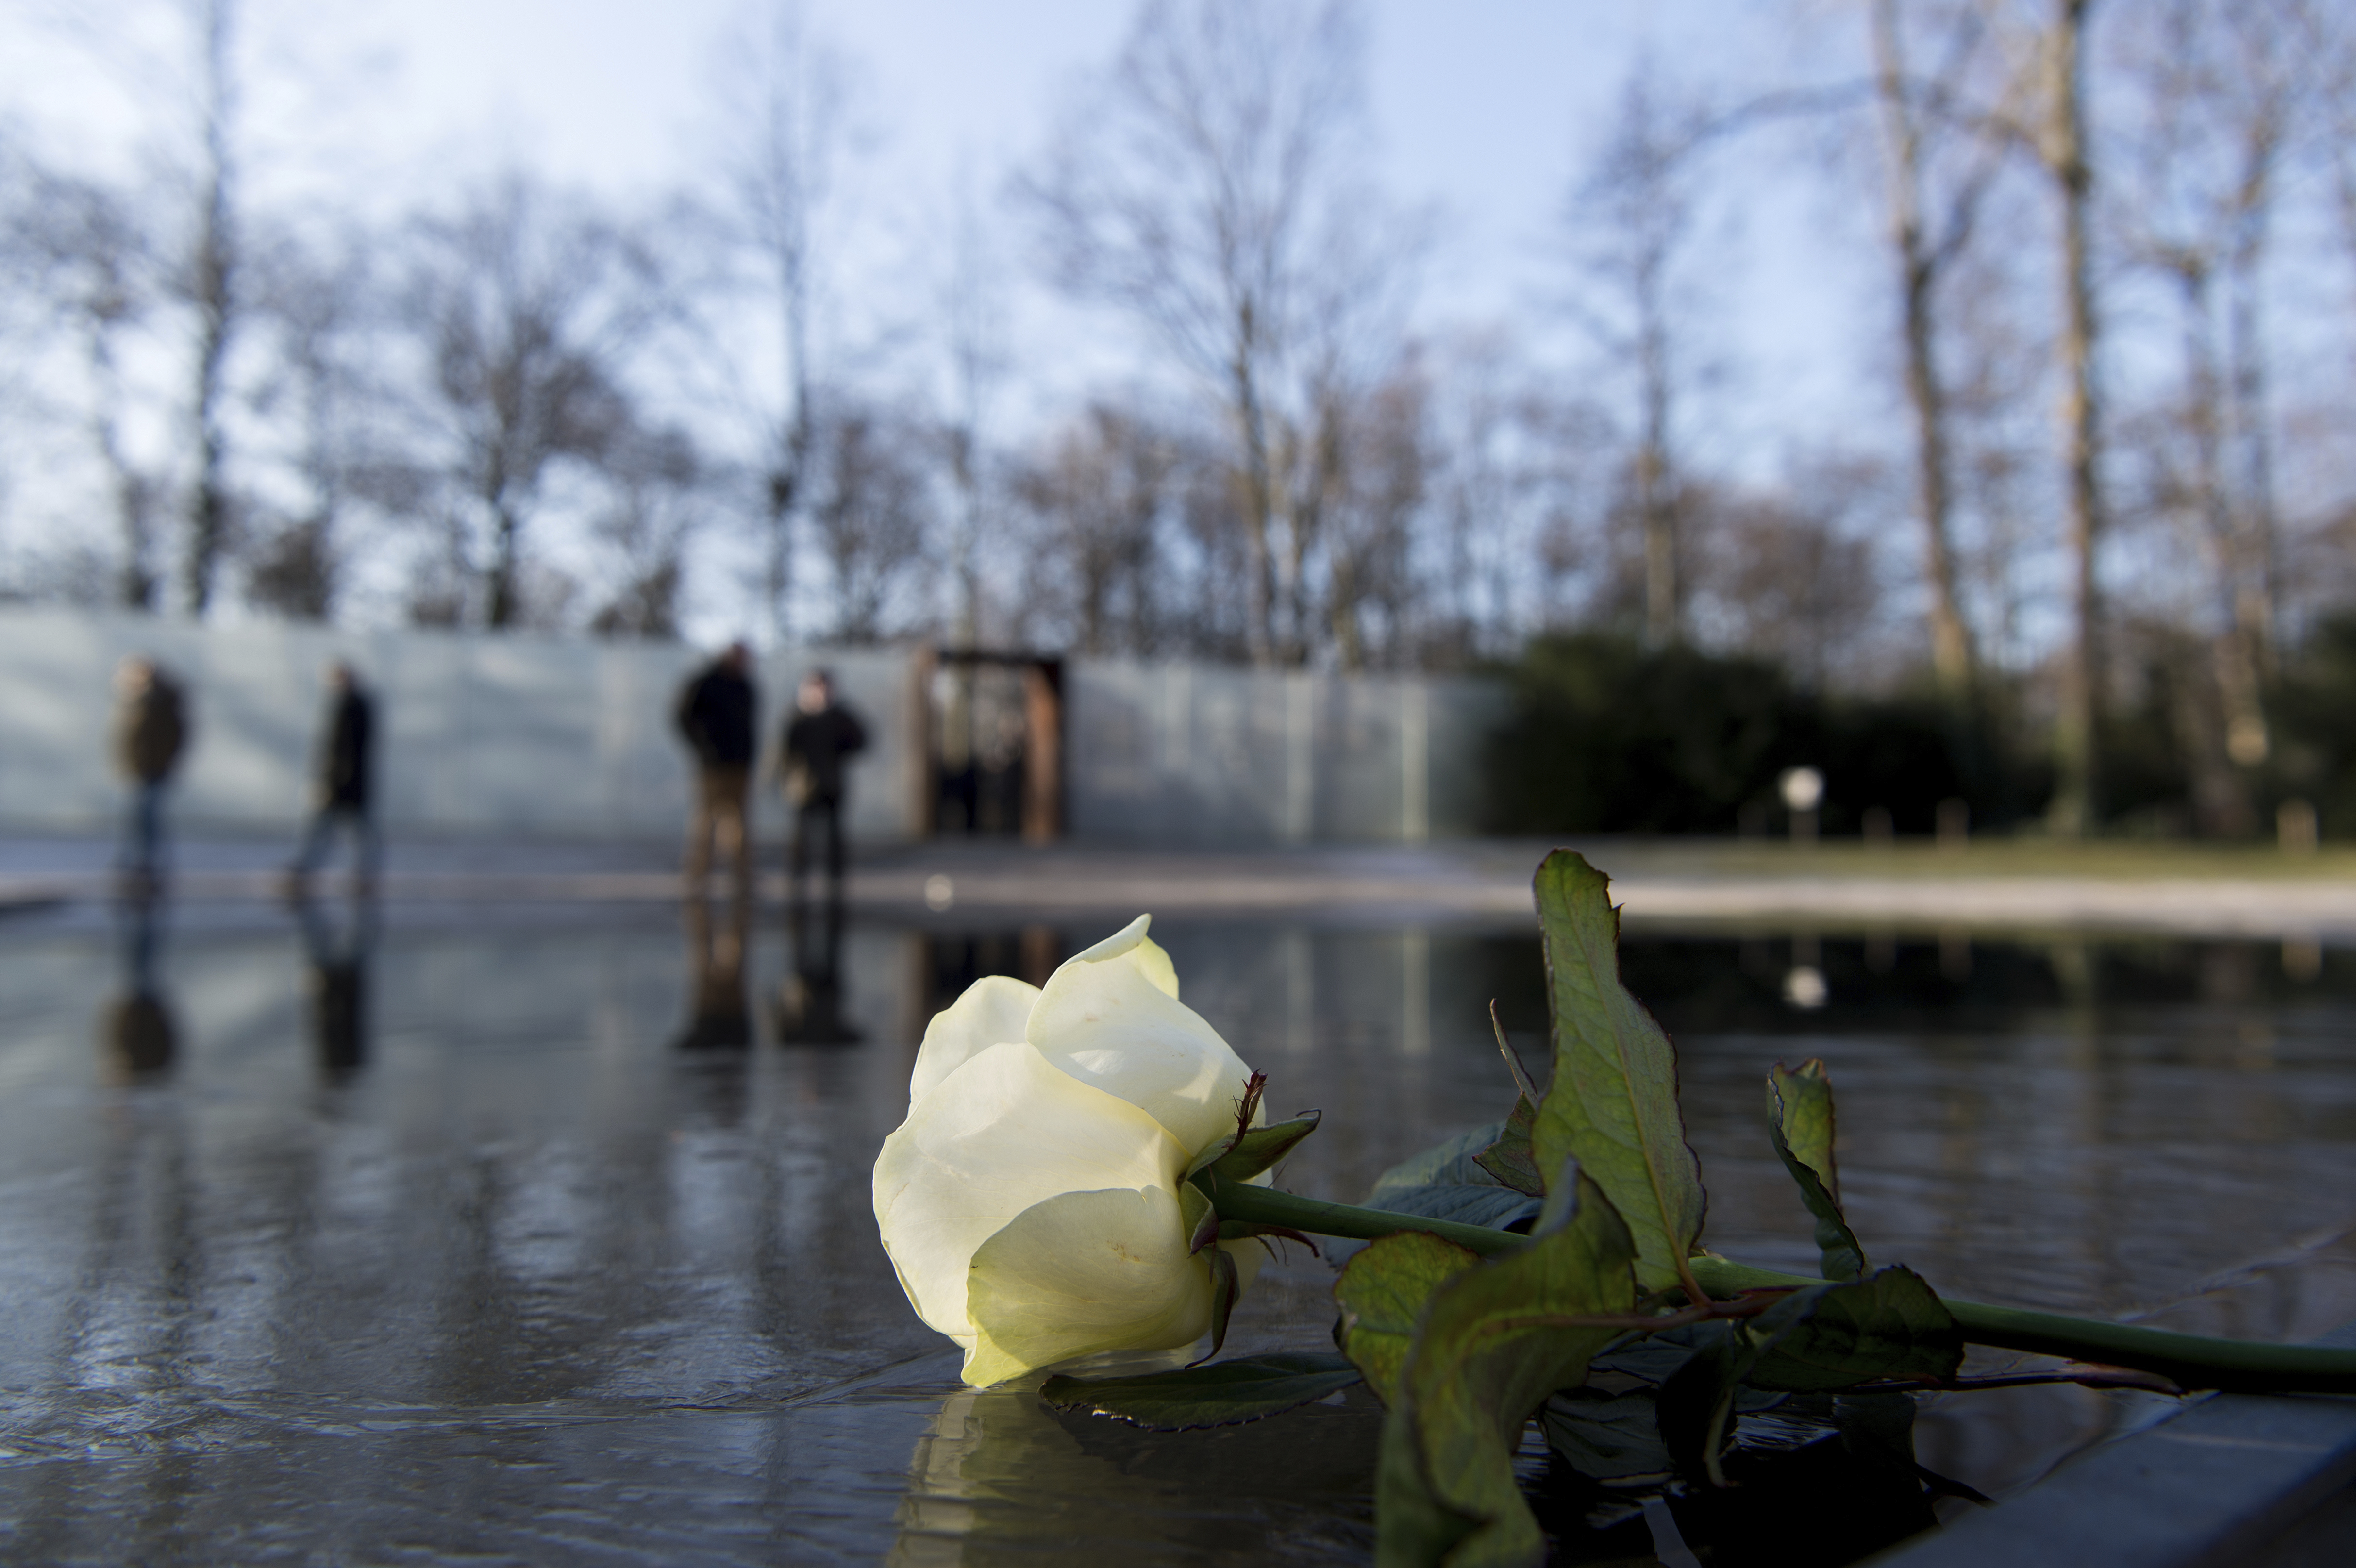 A white rose lies at the memorial for Europe's Sinti and Roma murdered during National Socialism during a memorial service held in remembrance of the Holocaust in Berlin, Germany, 27 January 2017. Photo by: Monika Skolimowska/picture-alliance/dpa/AP Images